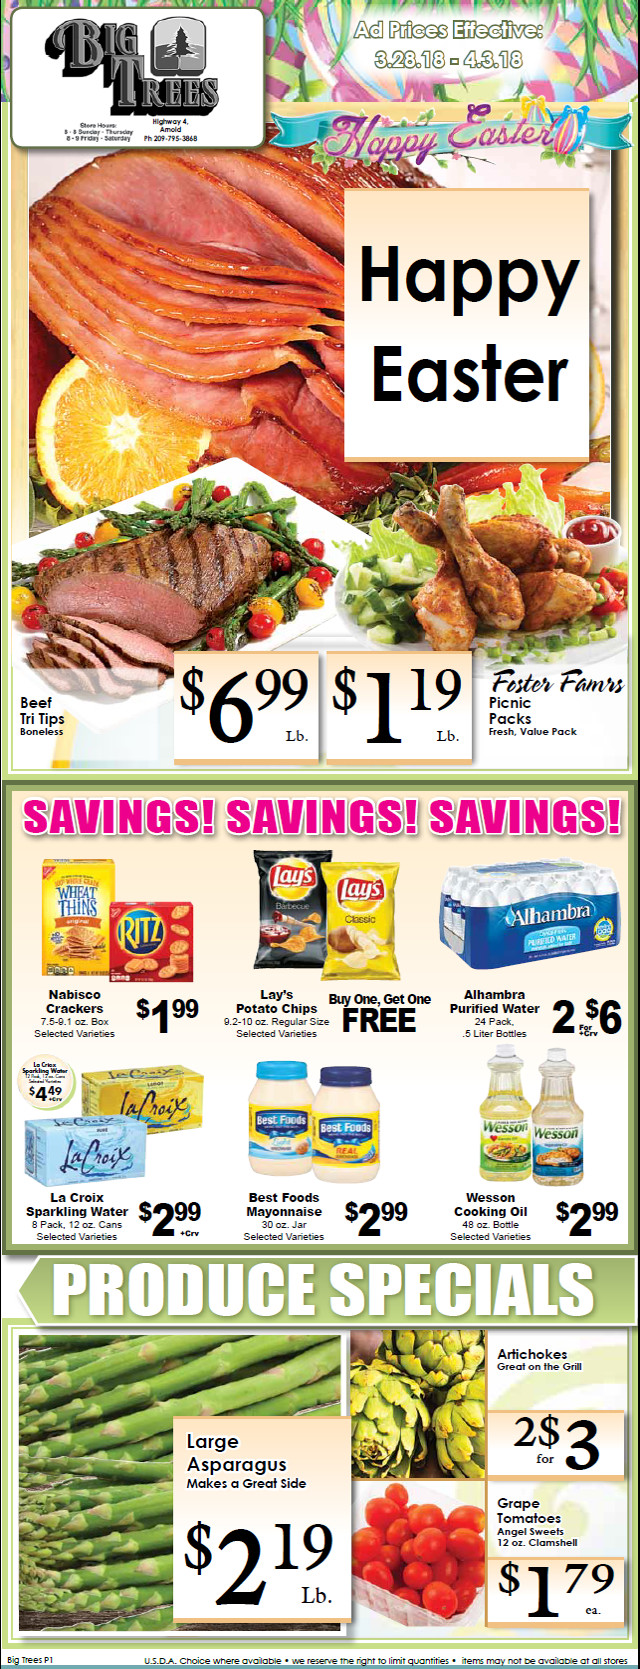 Big Trees Market Weekly Ad & Specials Through April 3rd Happy Easter!